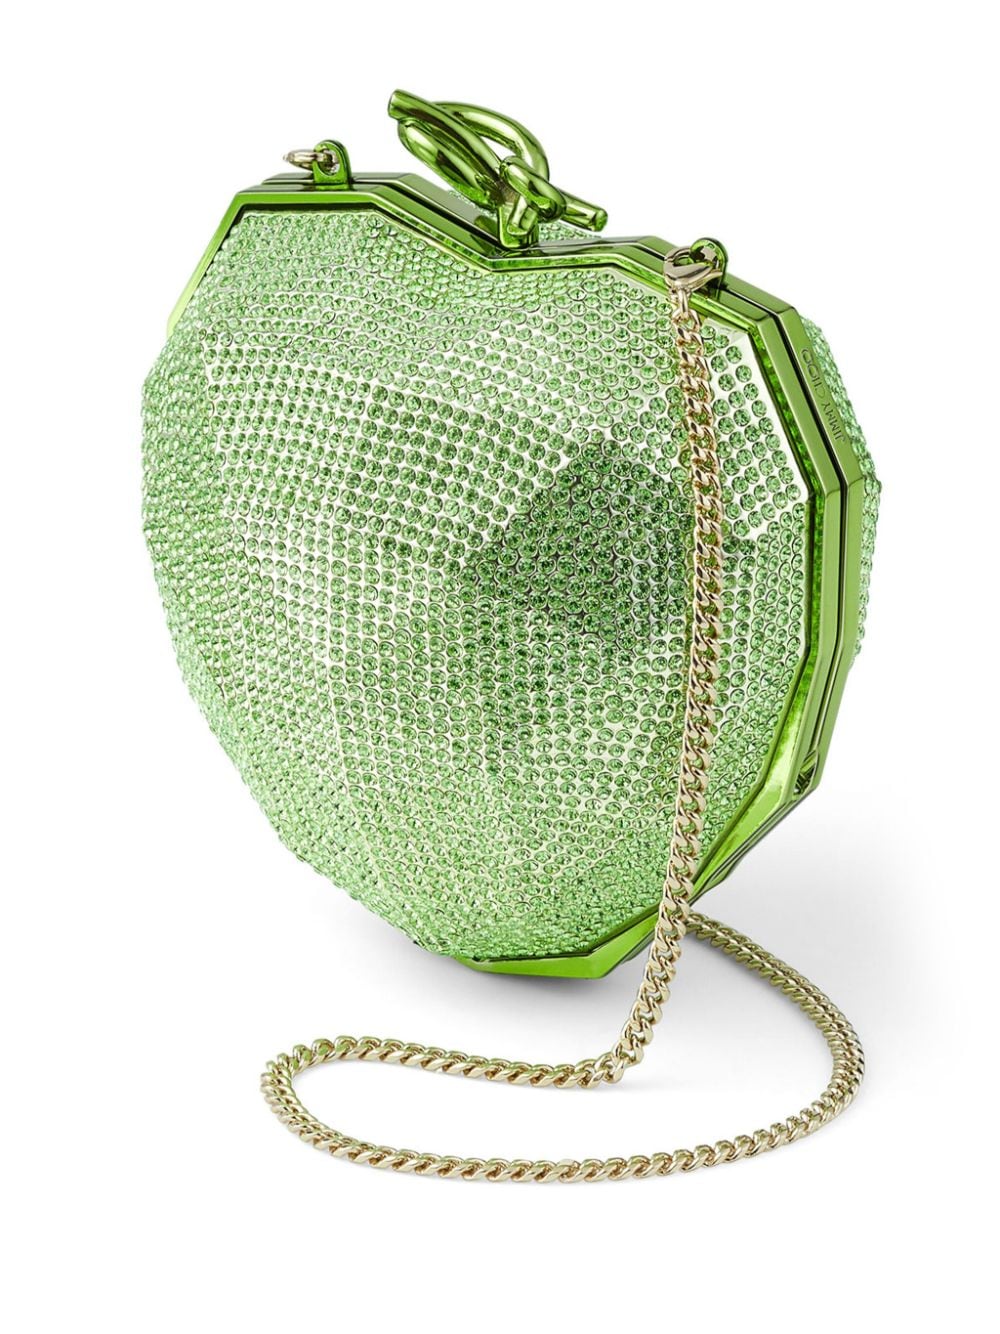 Image 2 of Jimmy Choo Faceted Heart clutch bag